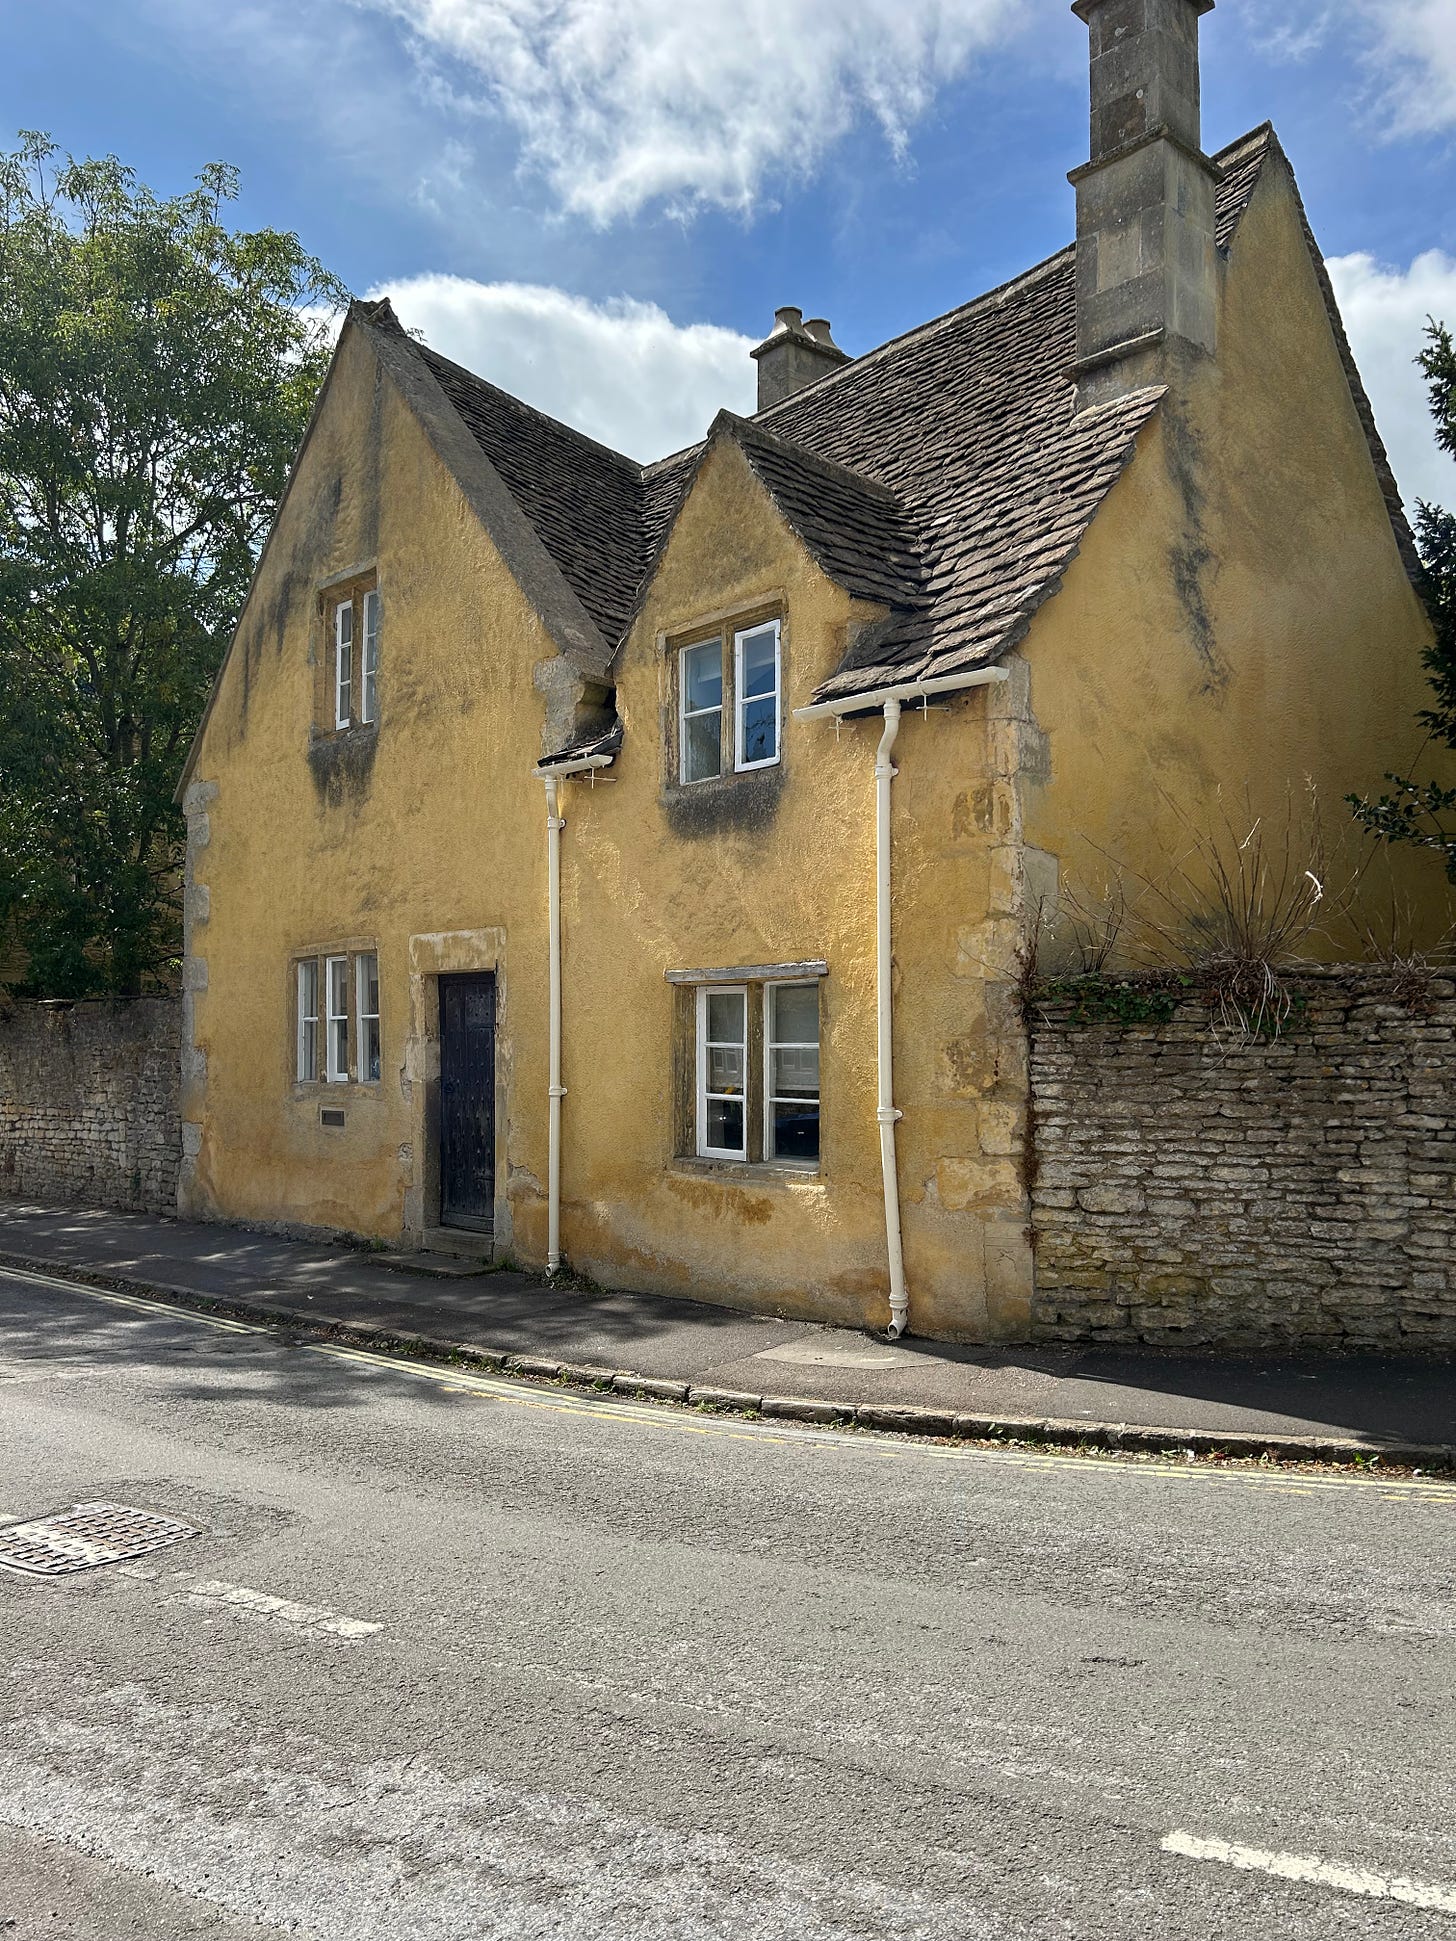 79 High Street, Corsham. This is a 15th century house and the oldest within Corsham tithing. Image: Roland's Travels